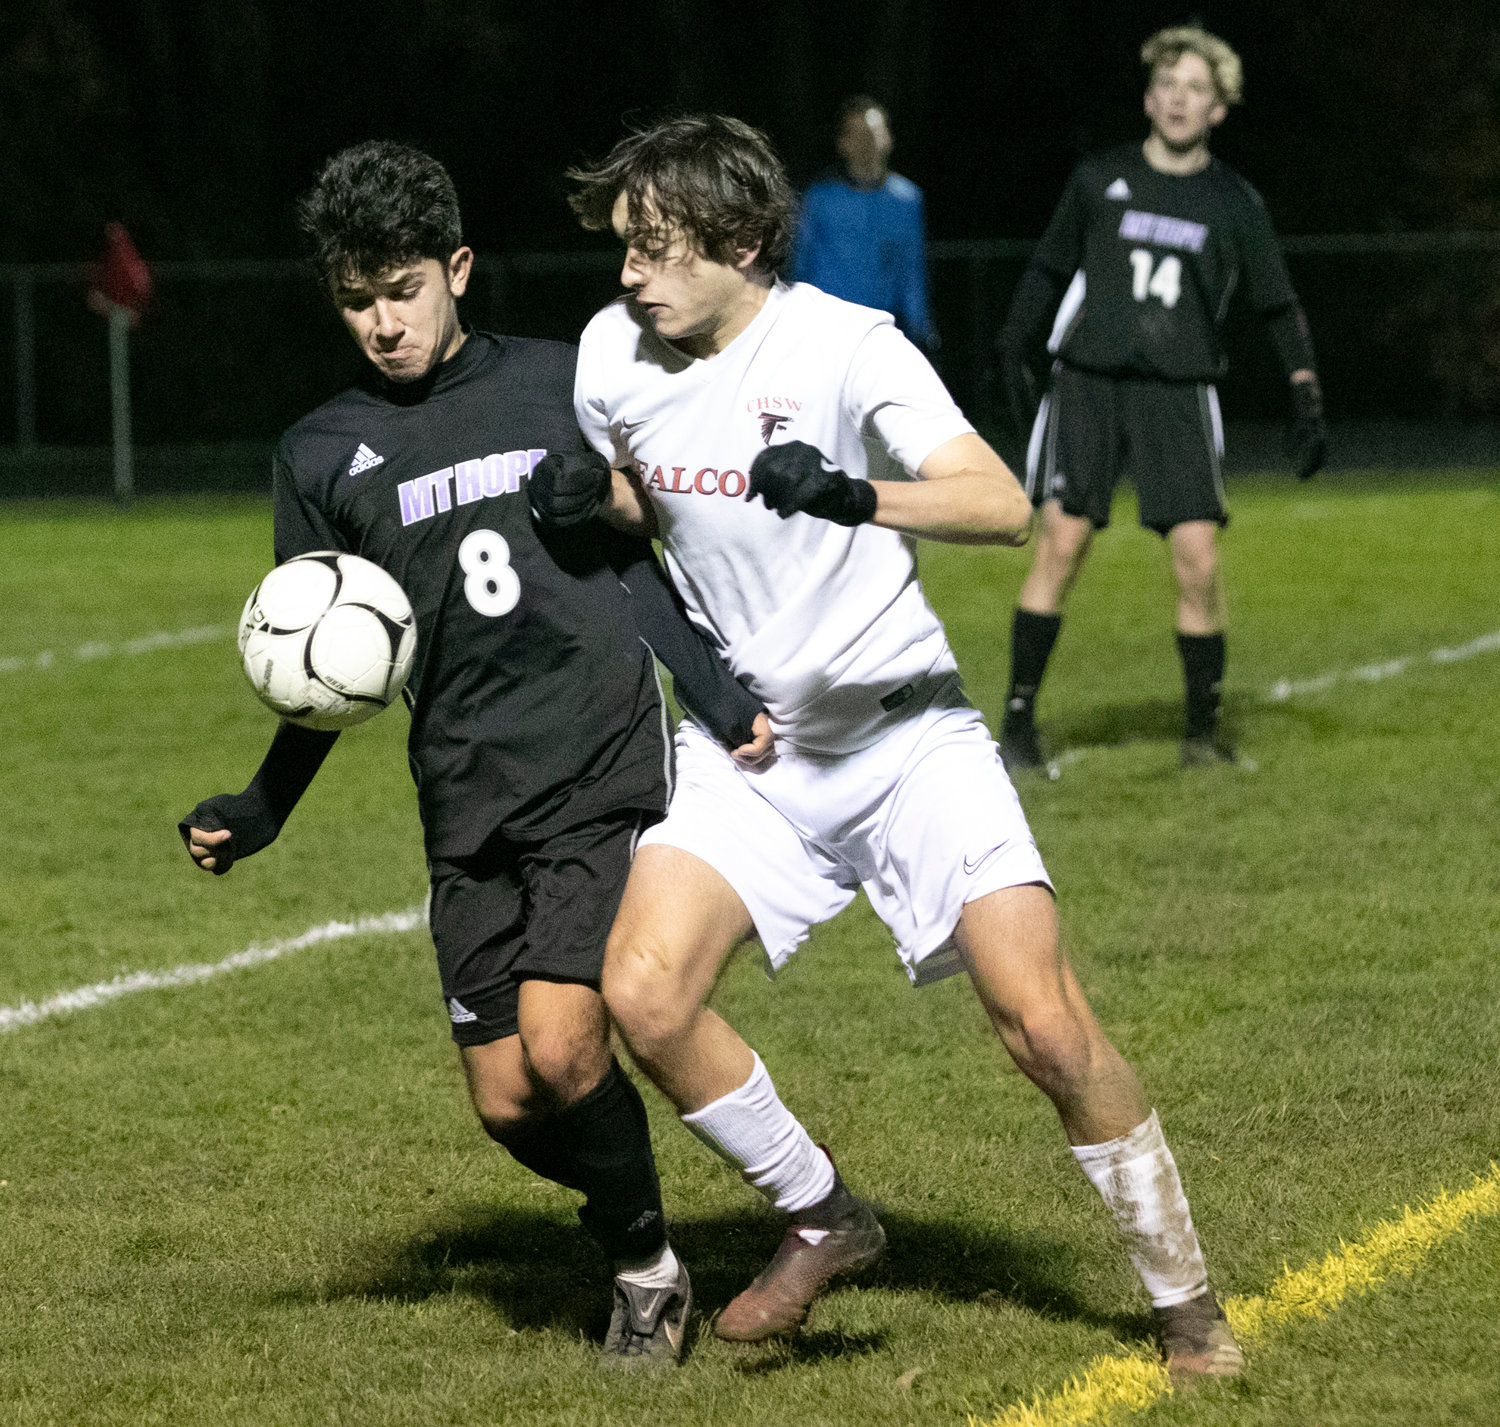 Chad Parente collects a pass and dribbles up field.